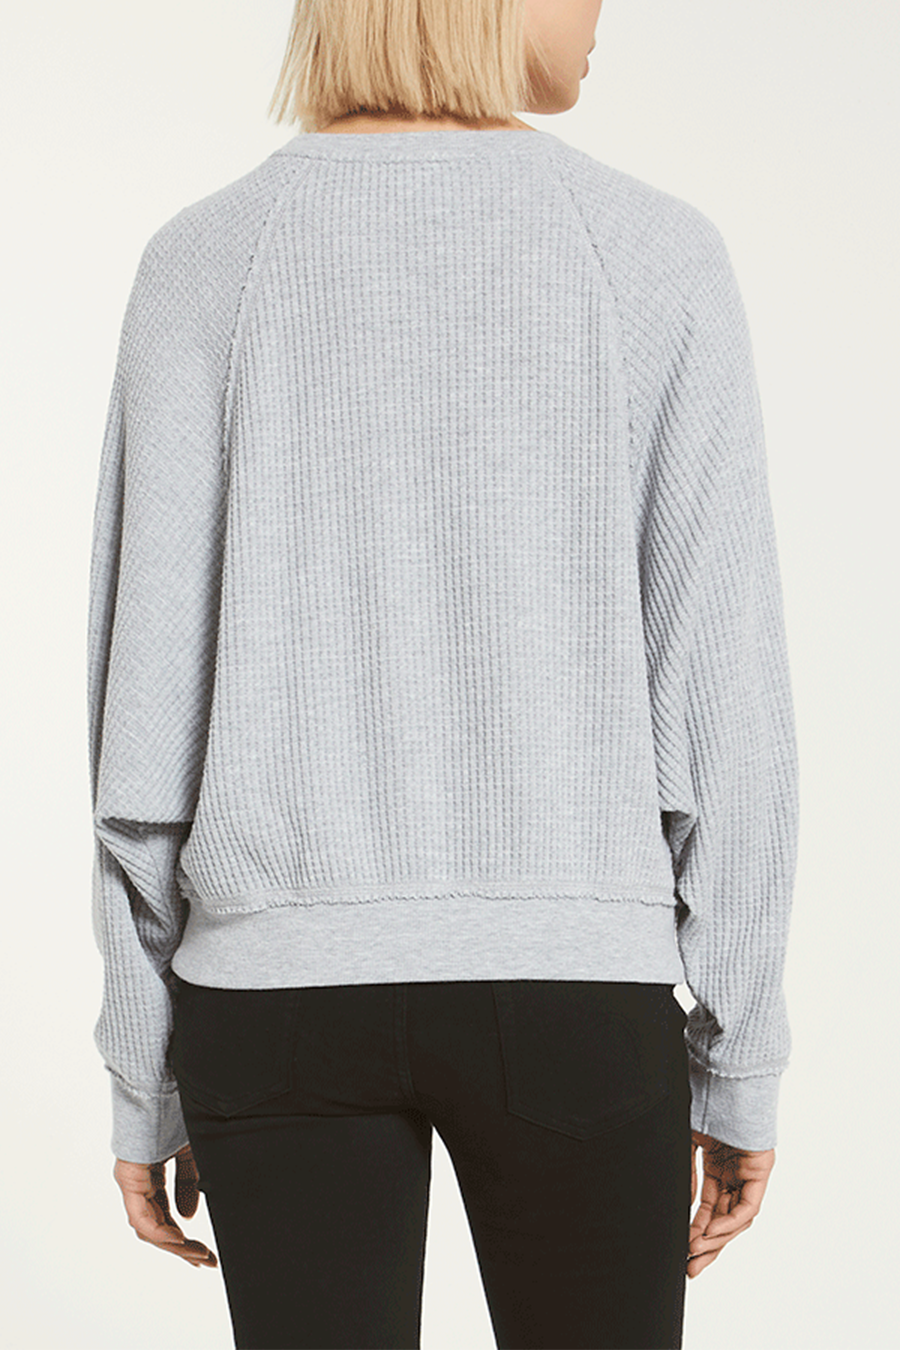 Claire Waffle Long Sleeve | H. Grey - Main Image Number 2 of 2